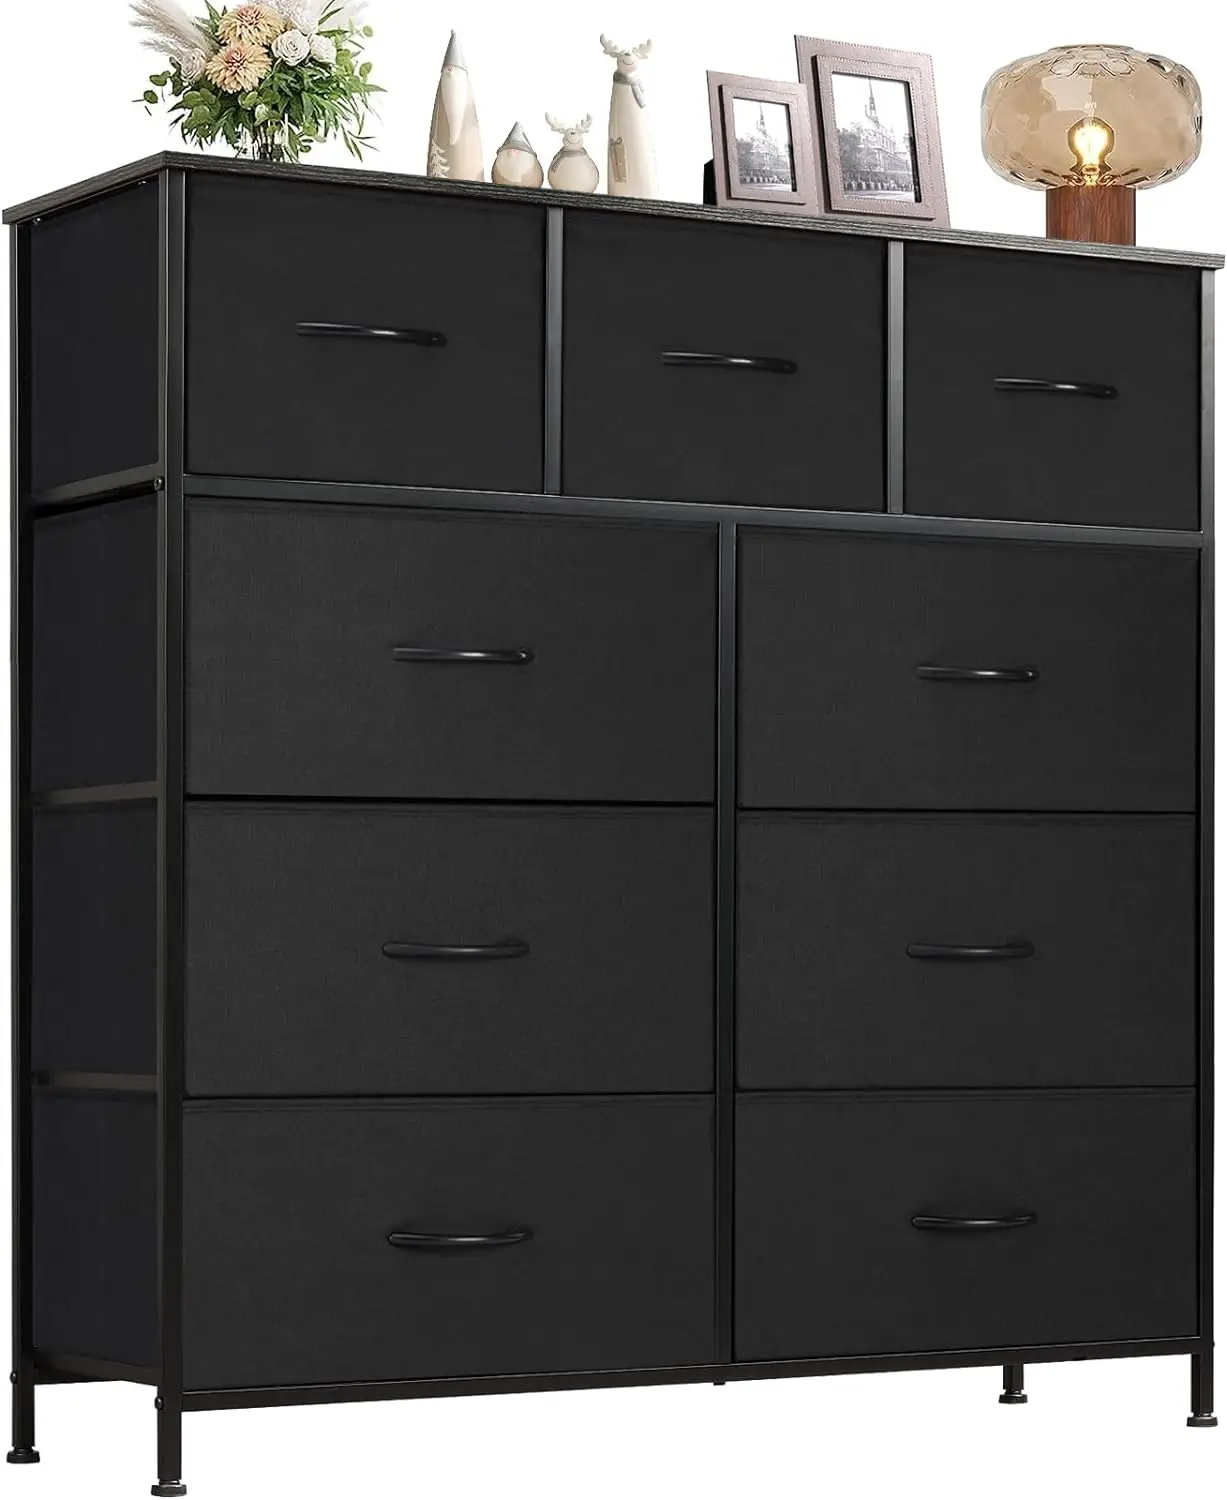 

Sweetcrispy Dresser with 9 Drawers,Storage Unit Organizer Chest for Clothes,Tall Dressers&Chests of Drawers for Bedroom,Hallway